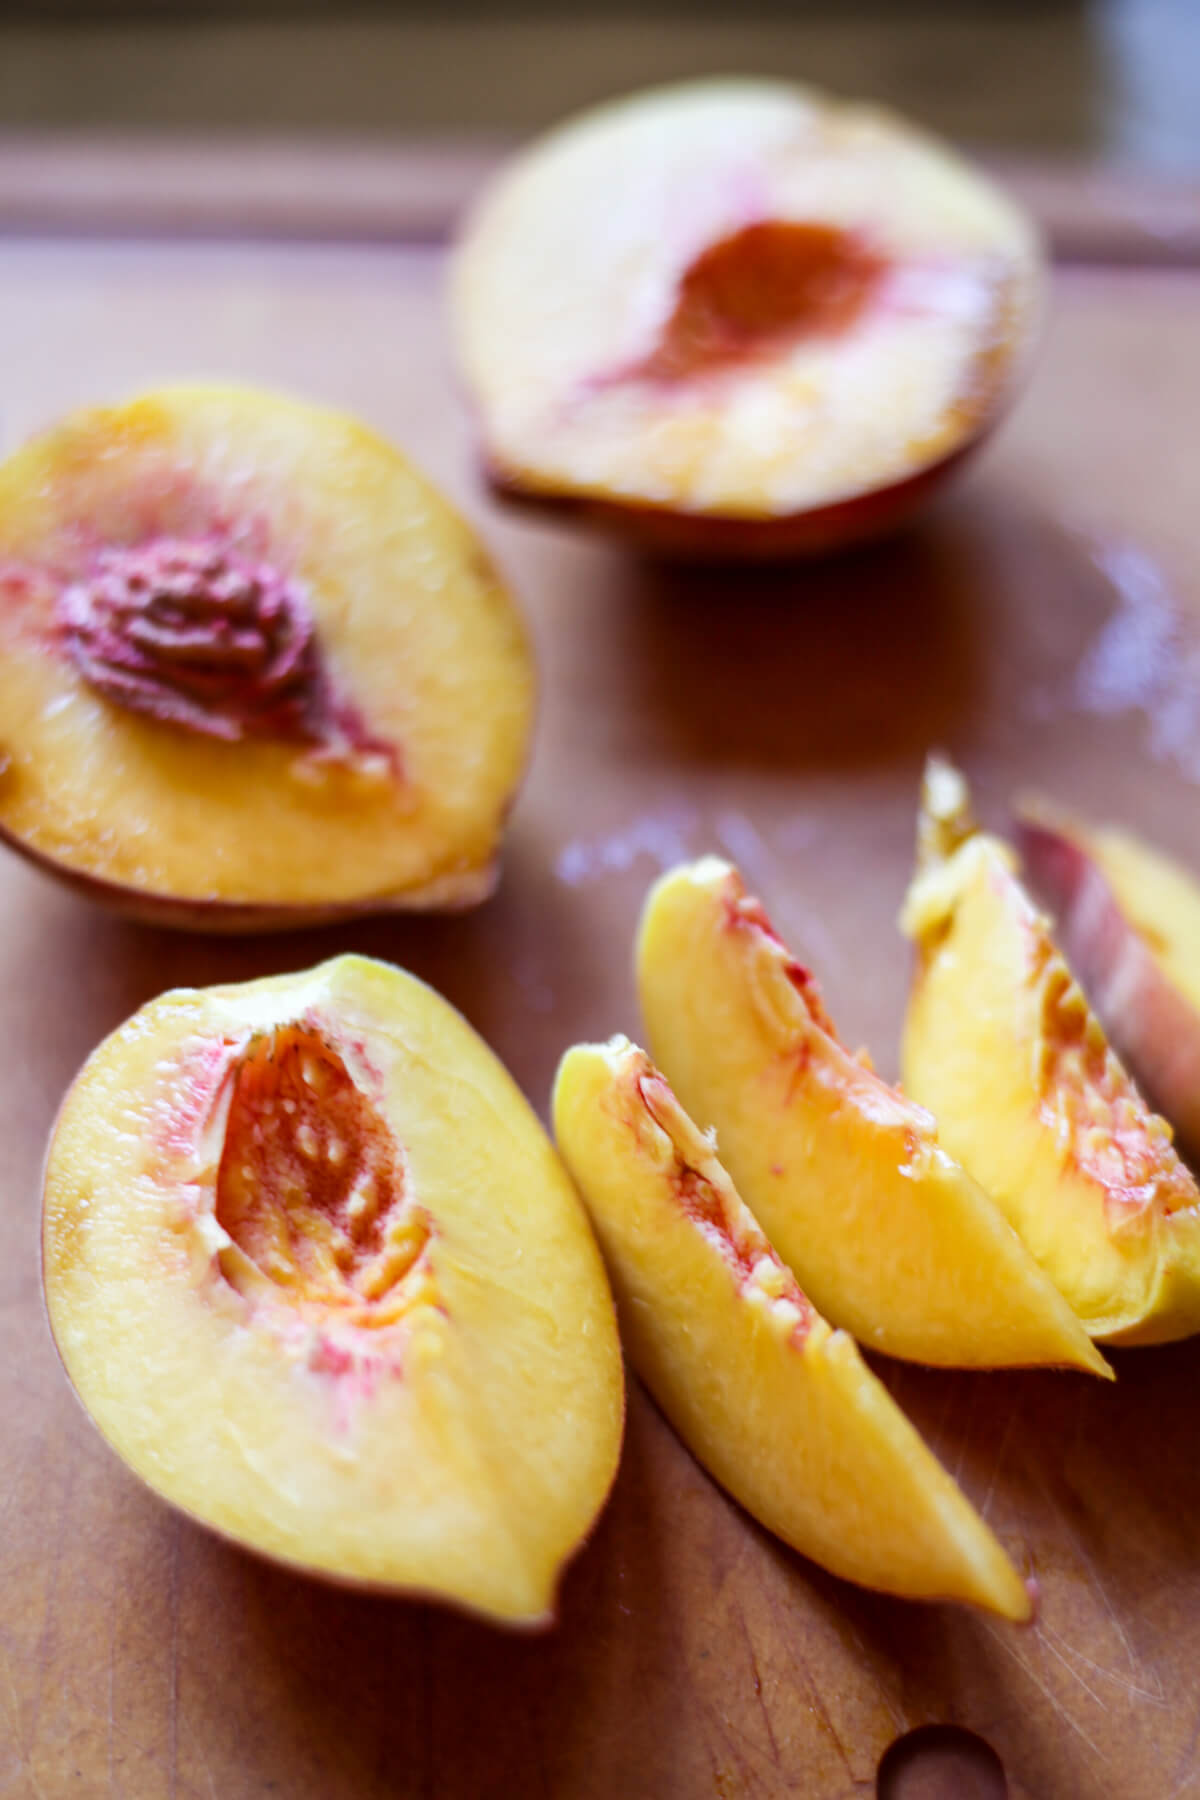 Peaches are cut in half and then sliced.